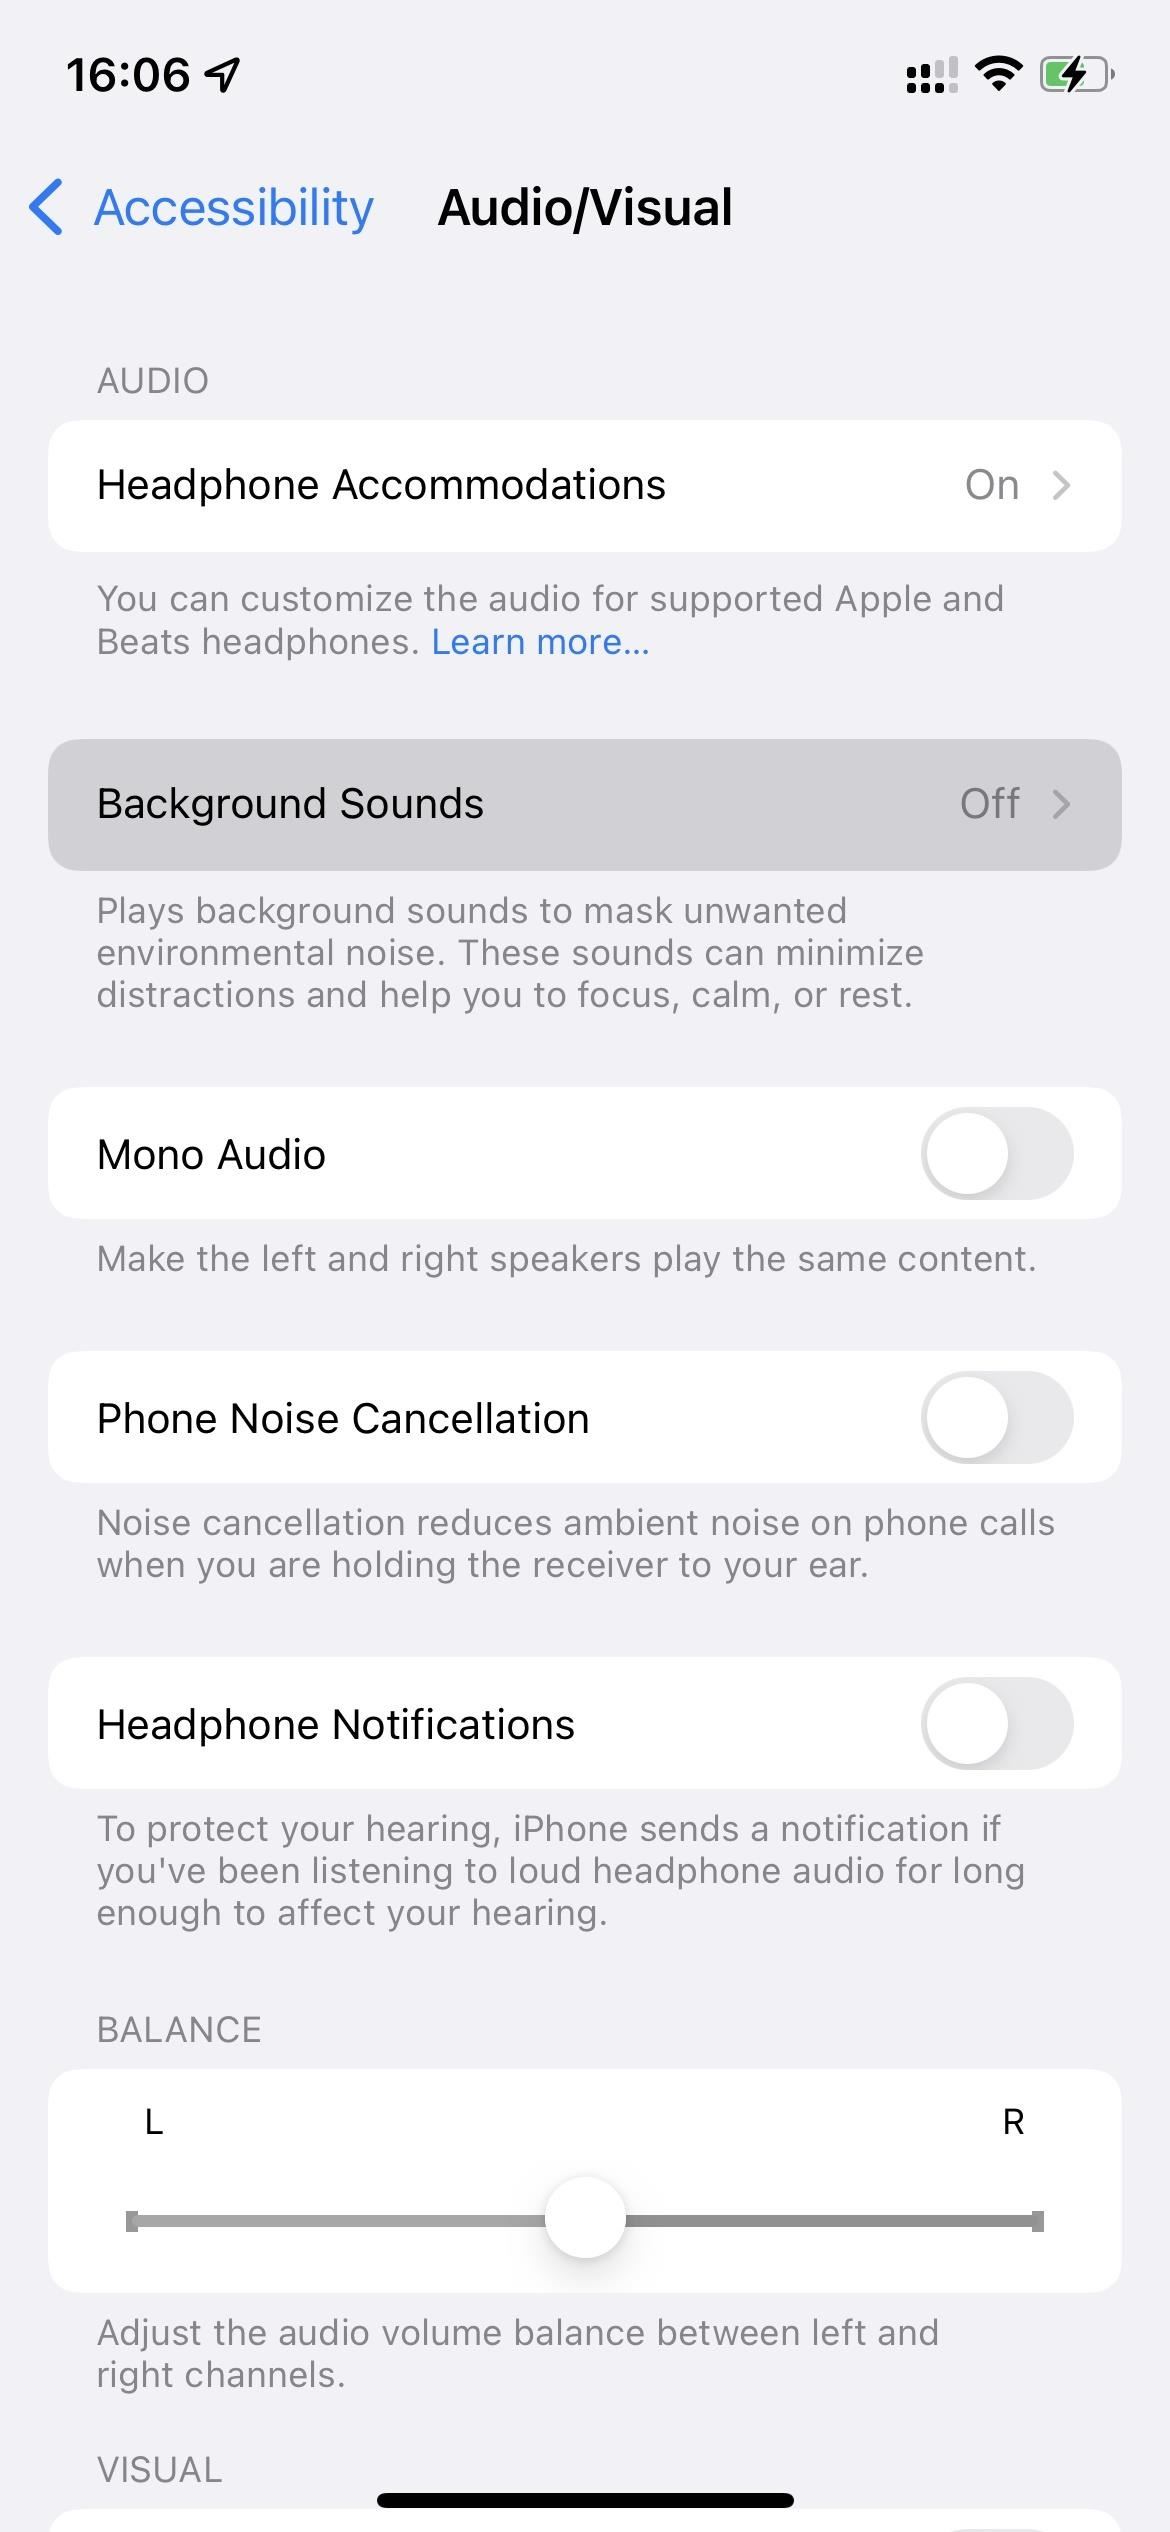 Turn Your iPhone into a Personal Sound Machine to Help You Focus, Rest, and Stay Calm